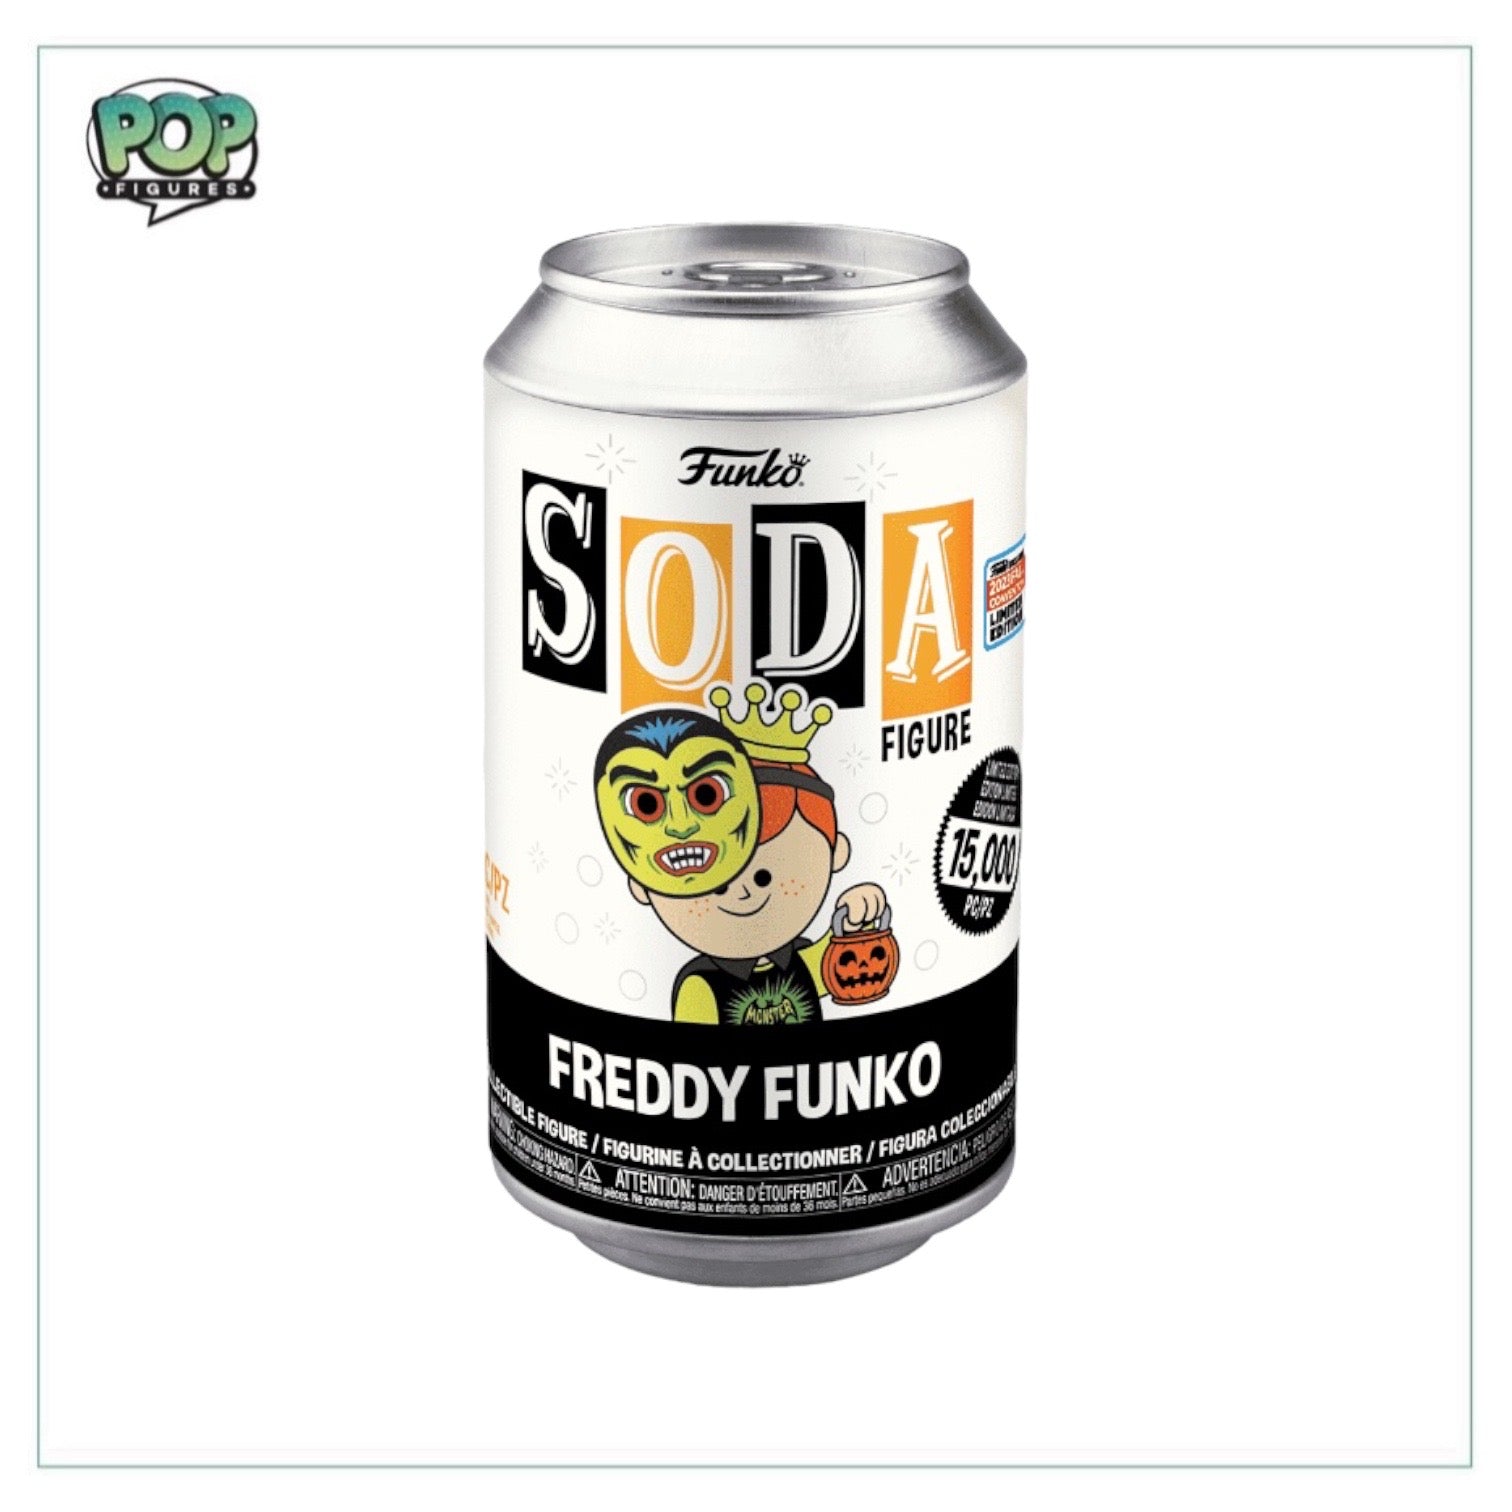 Freddy Funko (Trick or Treat) Funko Soda Vinyl Figure! - NYCC 2023 Shared Exclusive LE15000 Pcs - Chance of Chase